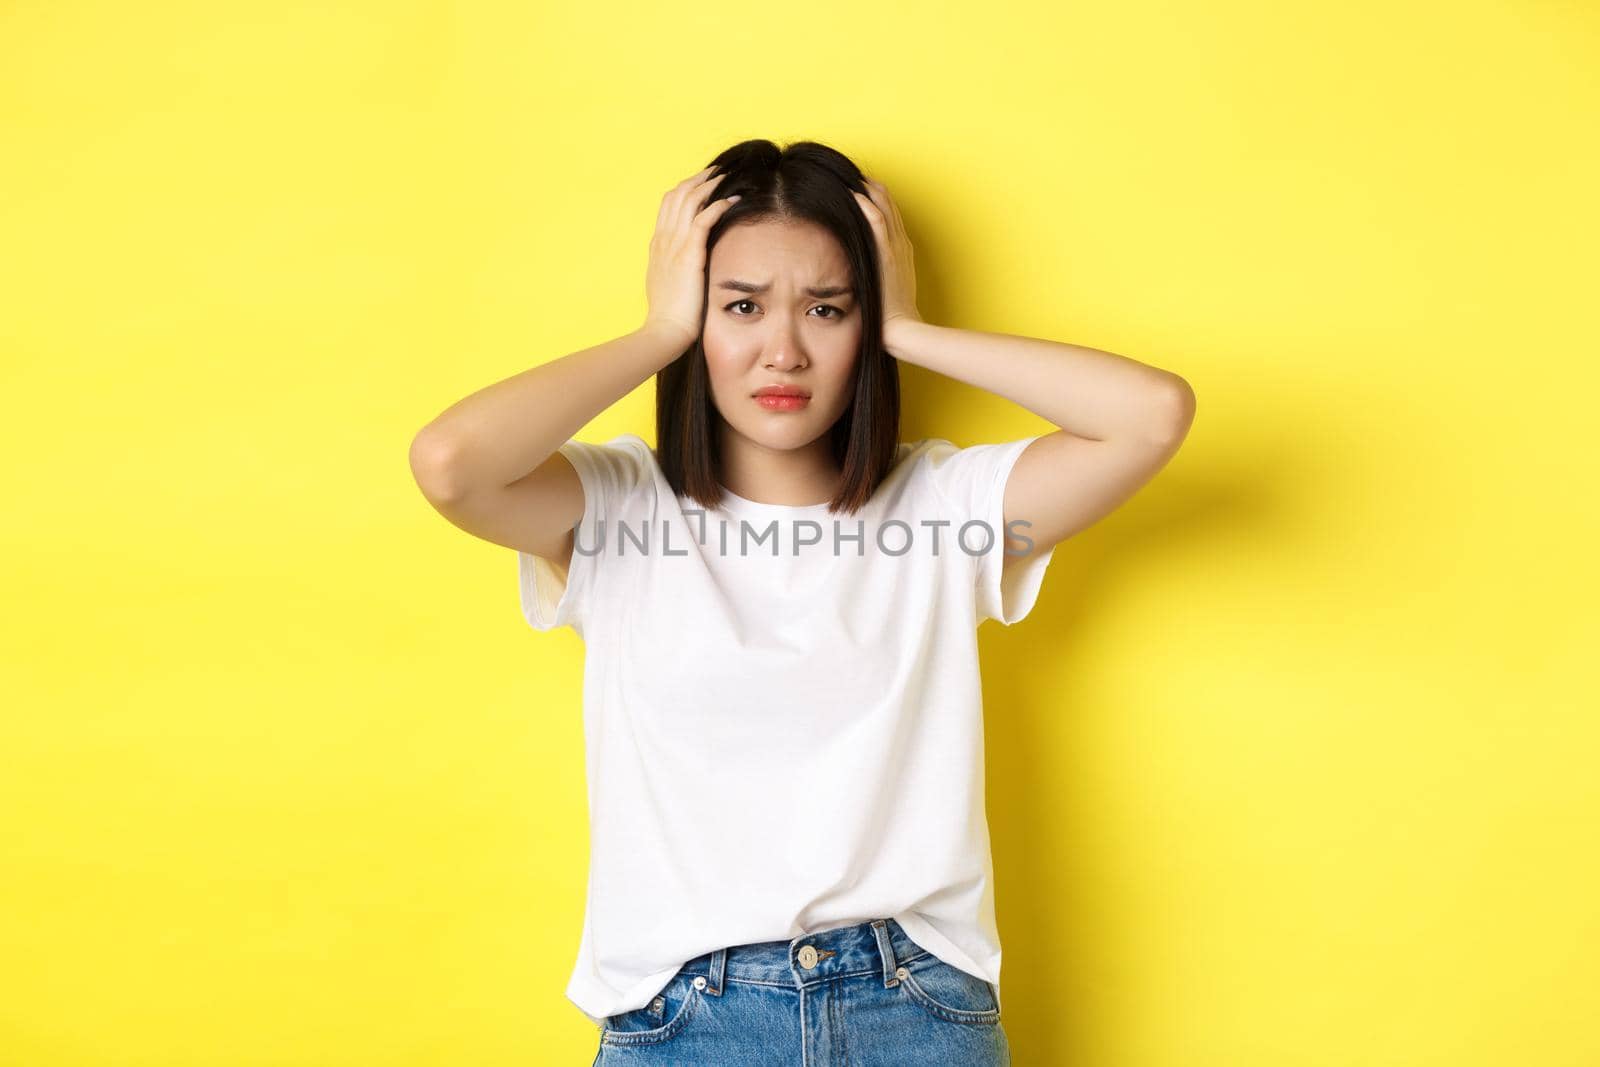 Asian woman holding hands on head and looking sad, having a problem, standing anxious against yellow background.